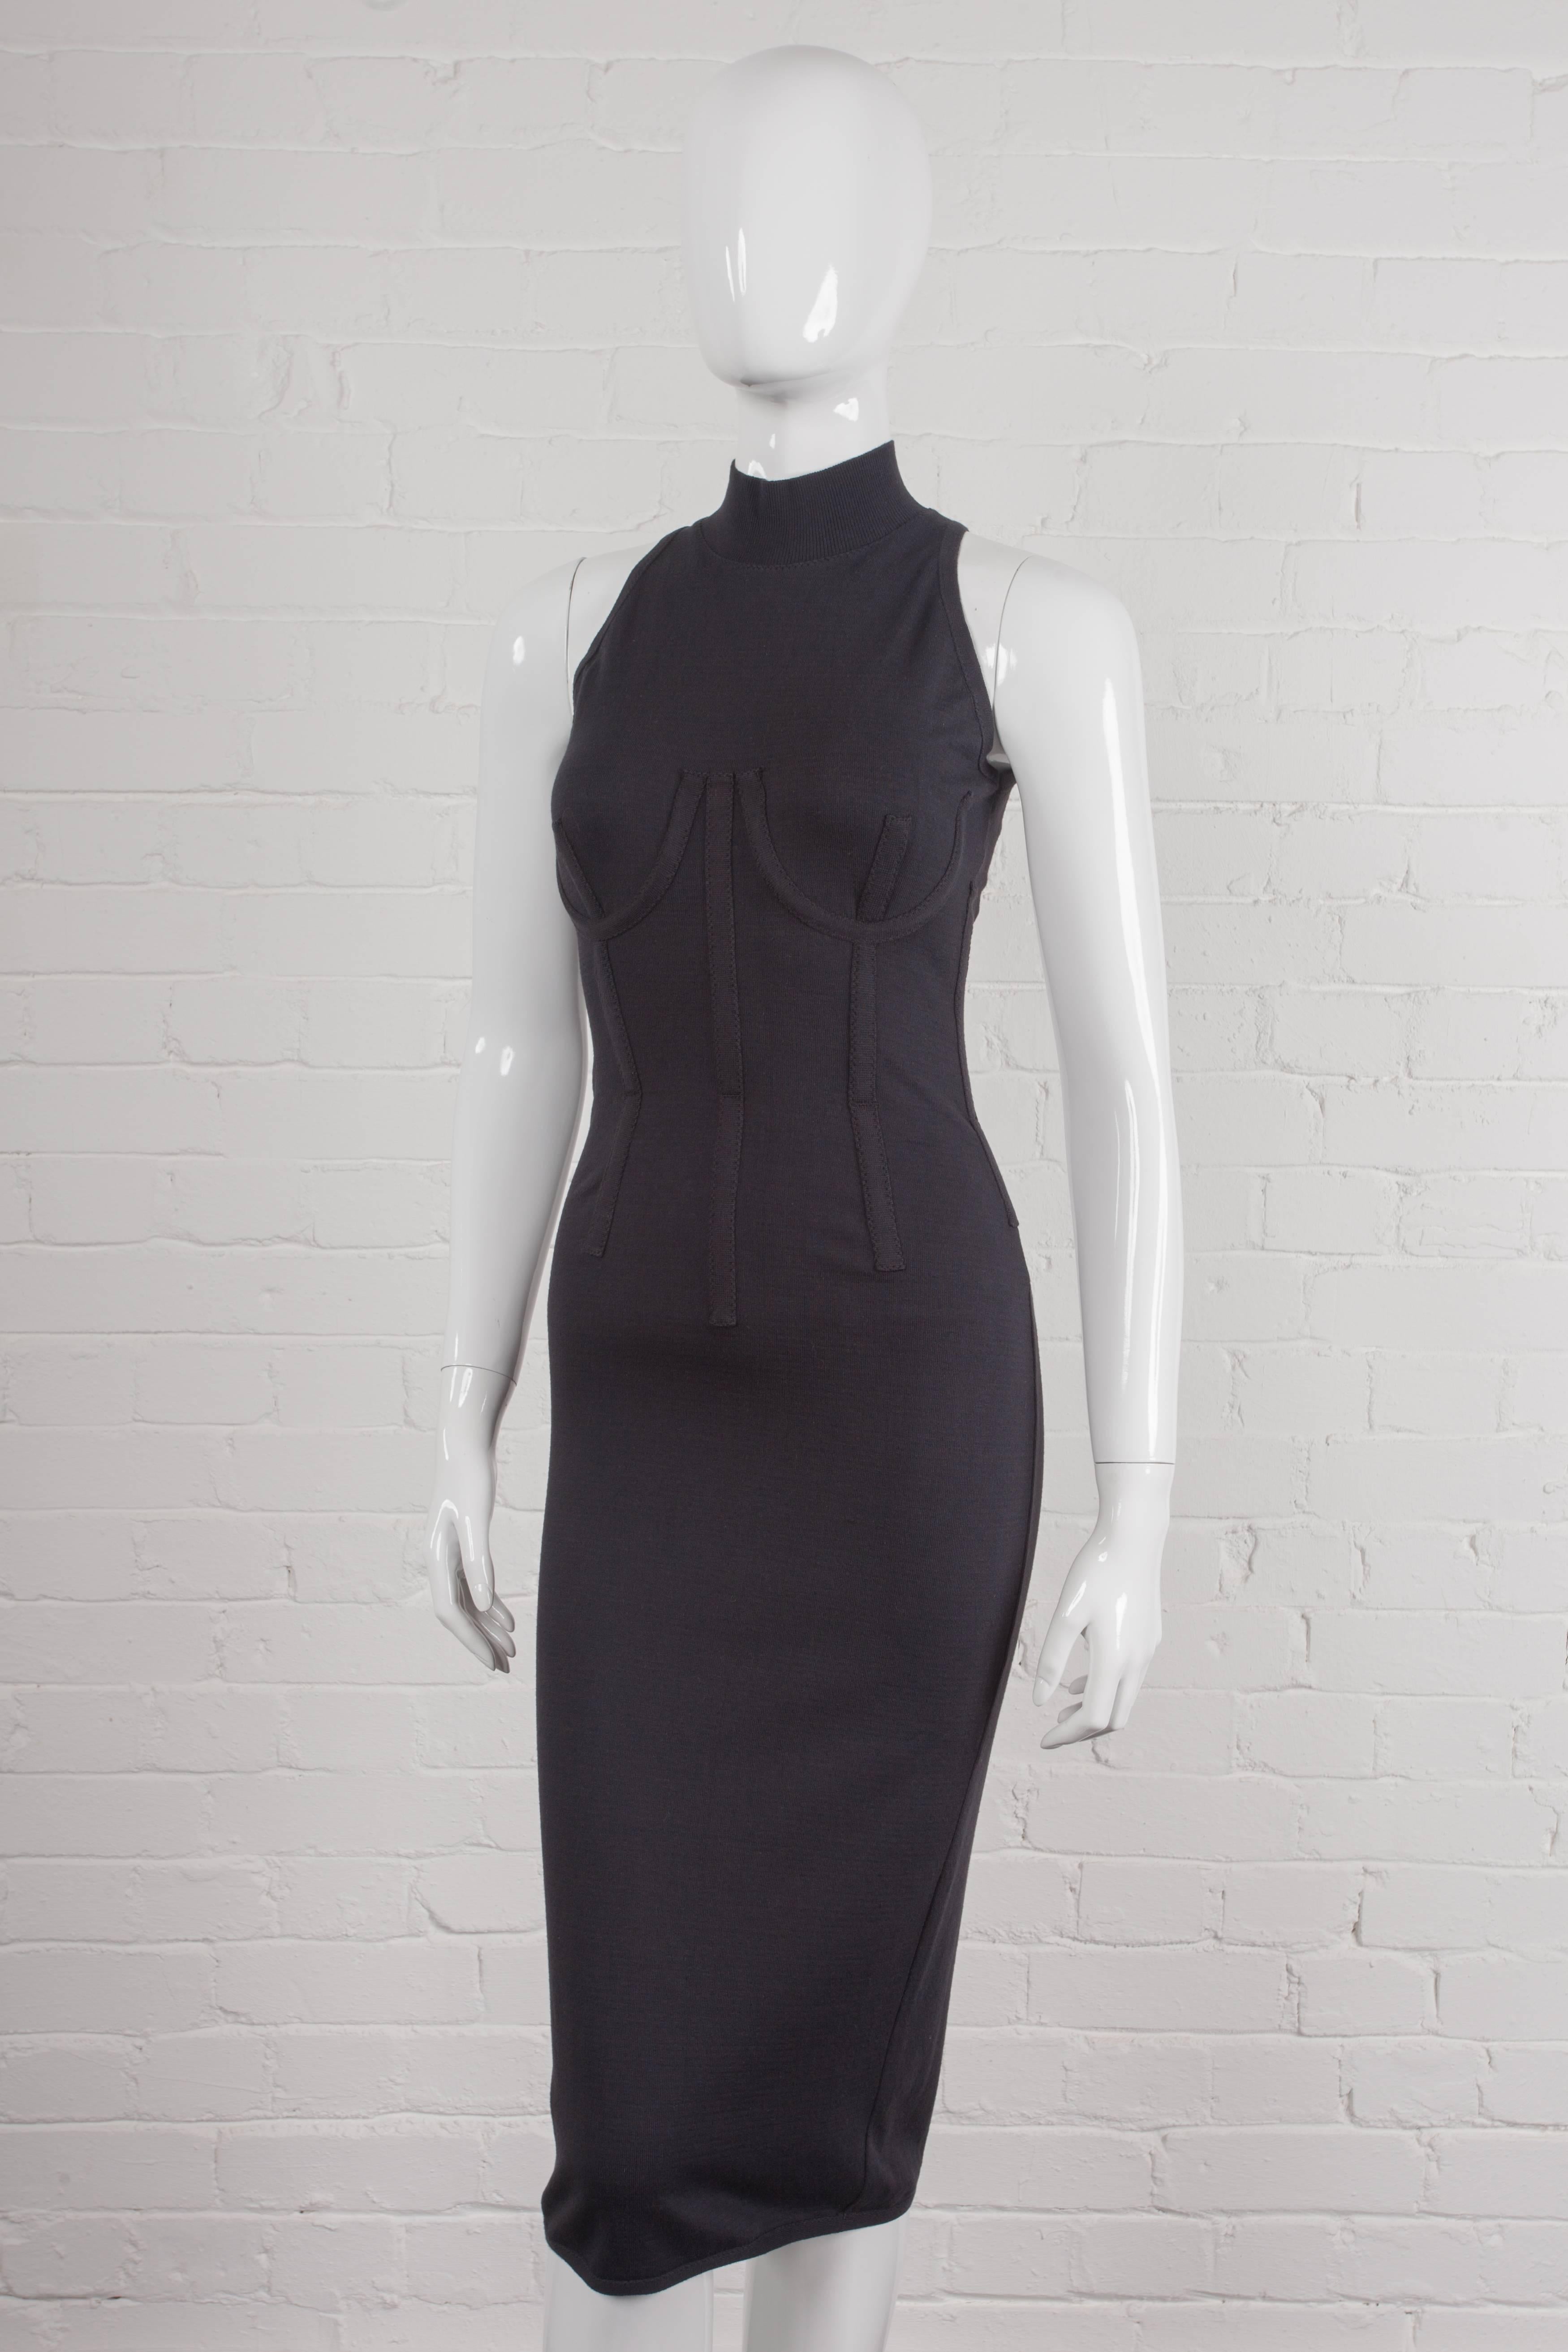 Vintage 1993 corset bodycon dress.

Black calf-length fitted dress with a stretch crew neck made from cotton blended with polyamide. From the Spring/Summer 1993 “Gaultier Classic Revisited” Collection. Features under-wiring on the outside to the